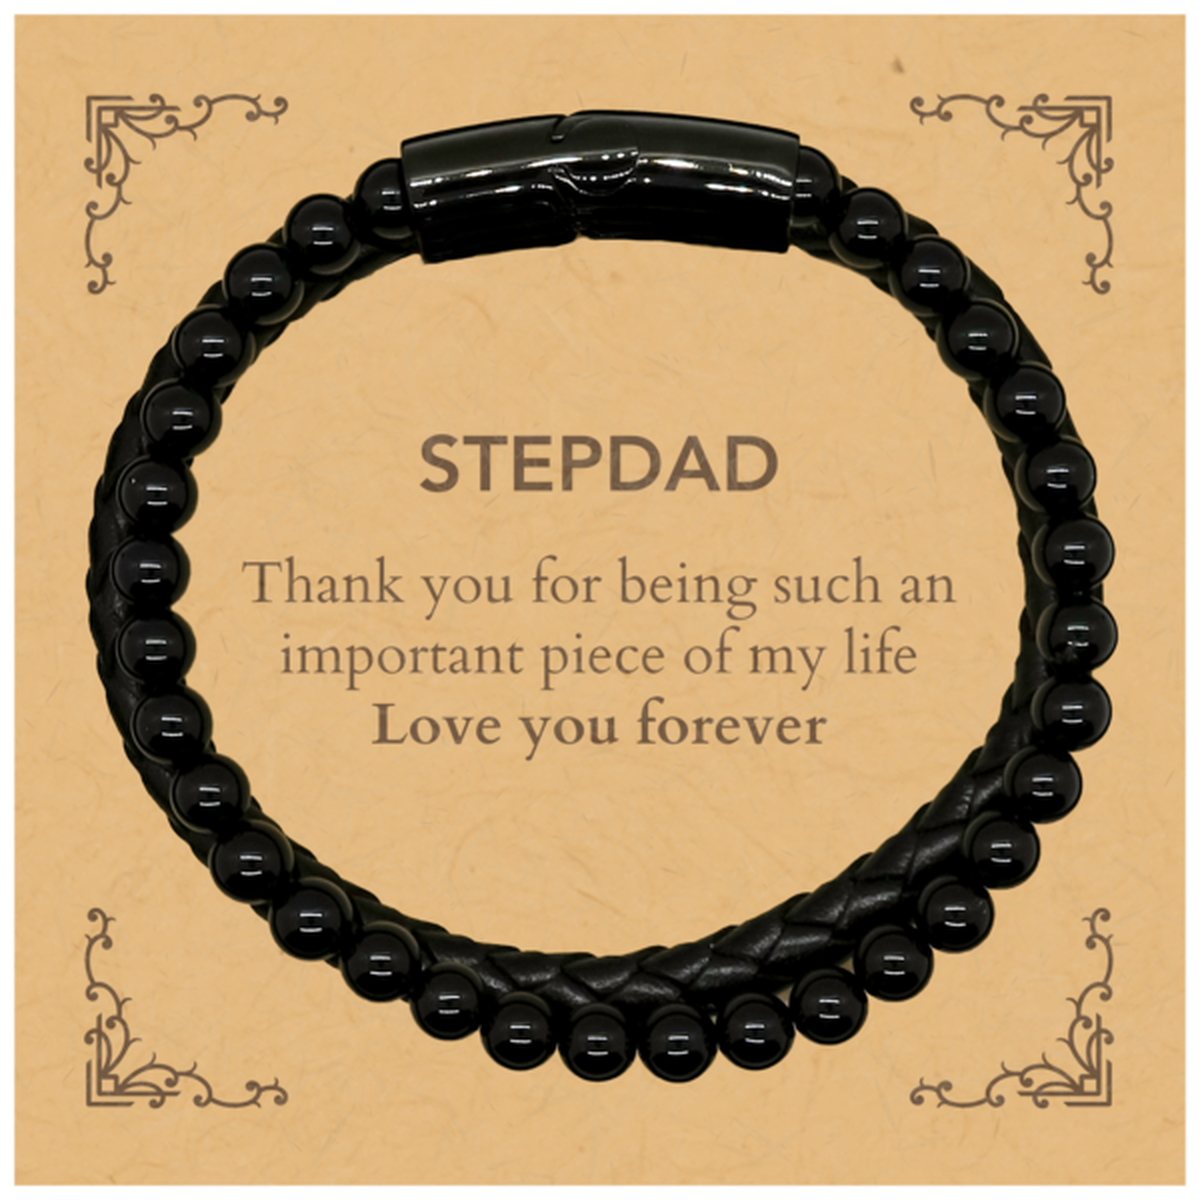 Appropriate Stepdad Stone Leather Bracelets Epic Birthday Gifts for Stepdad Thank you for being such an important piece of my life Stepdad Christmas Mothers Fathers Day